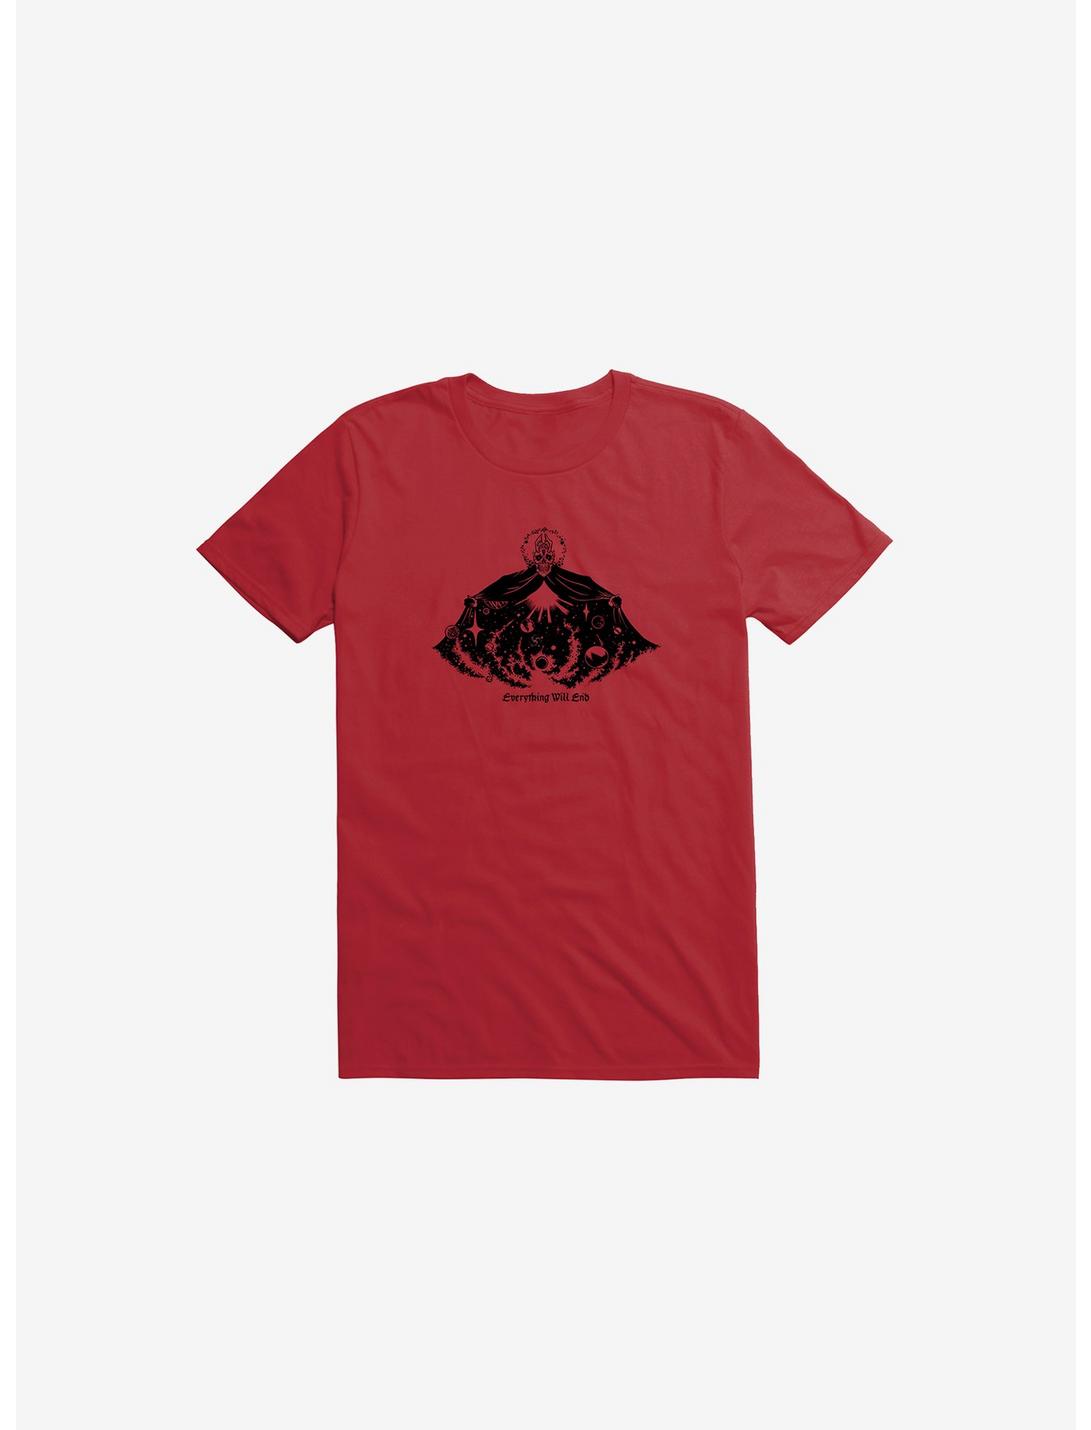 Everything Will End T-Shirt, RED, hi-res